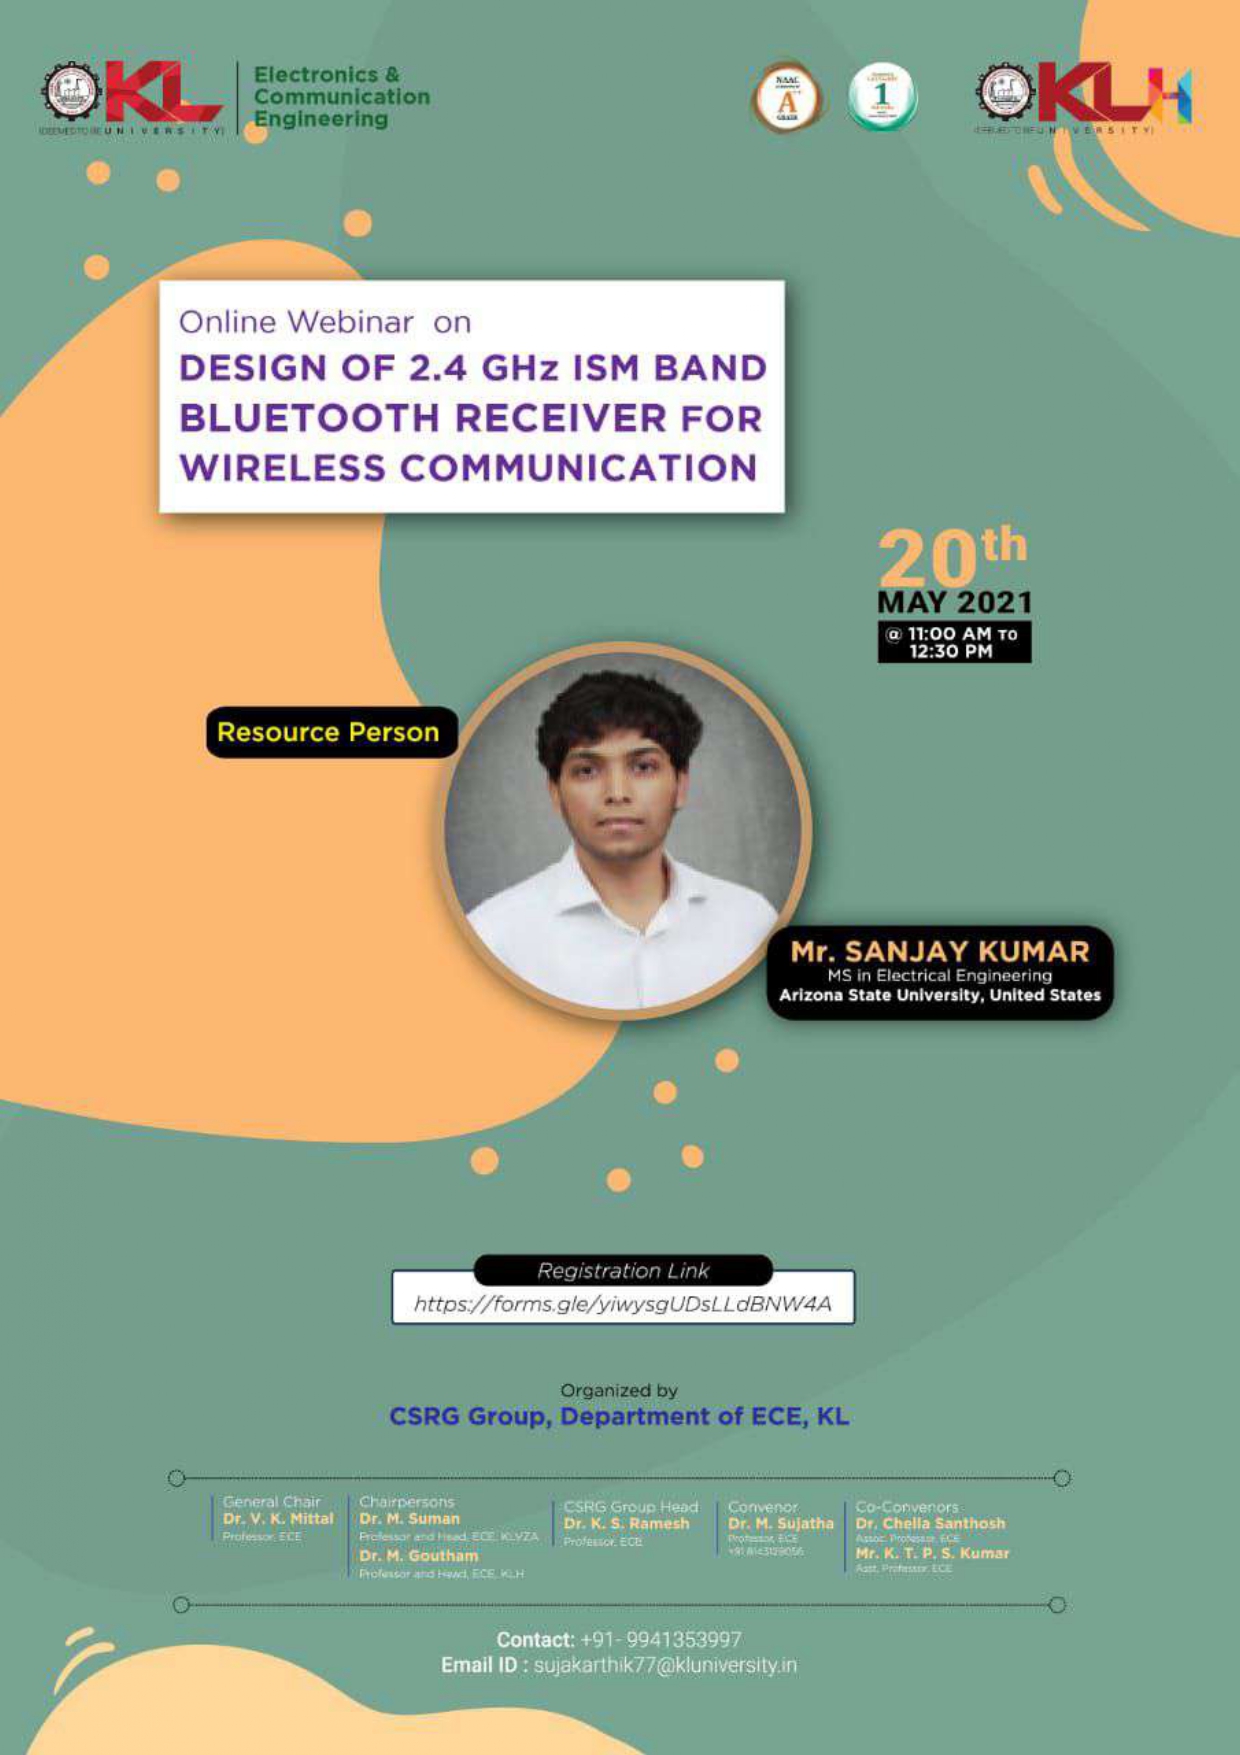  Online webinar on Design Of 2.4GHz ISM Band Bluetooth Receiver For Wireless Communication